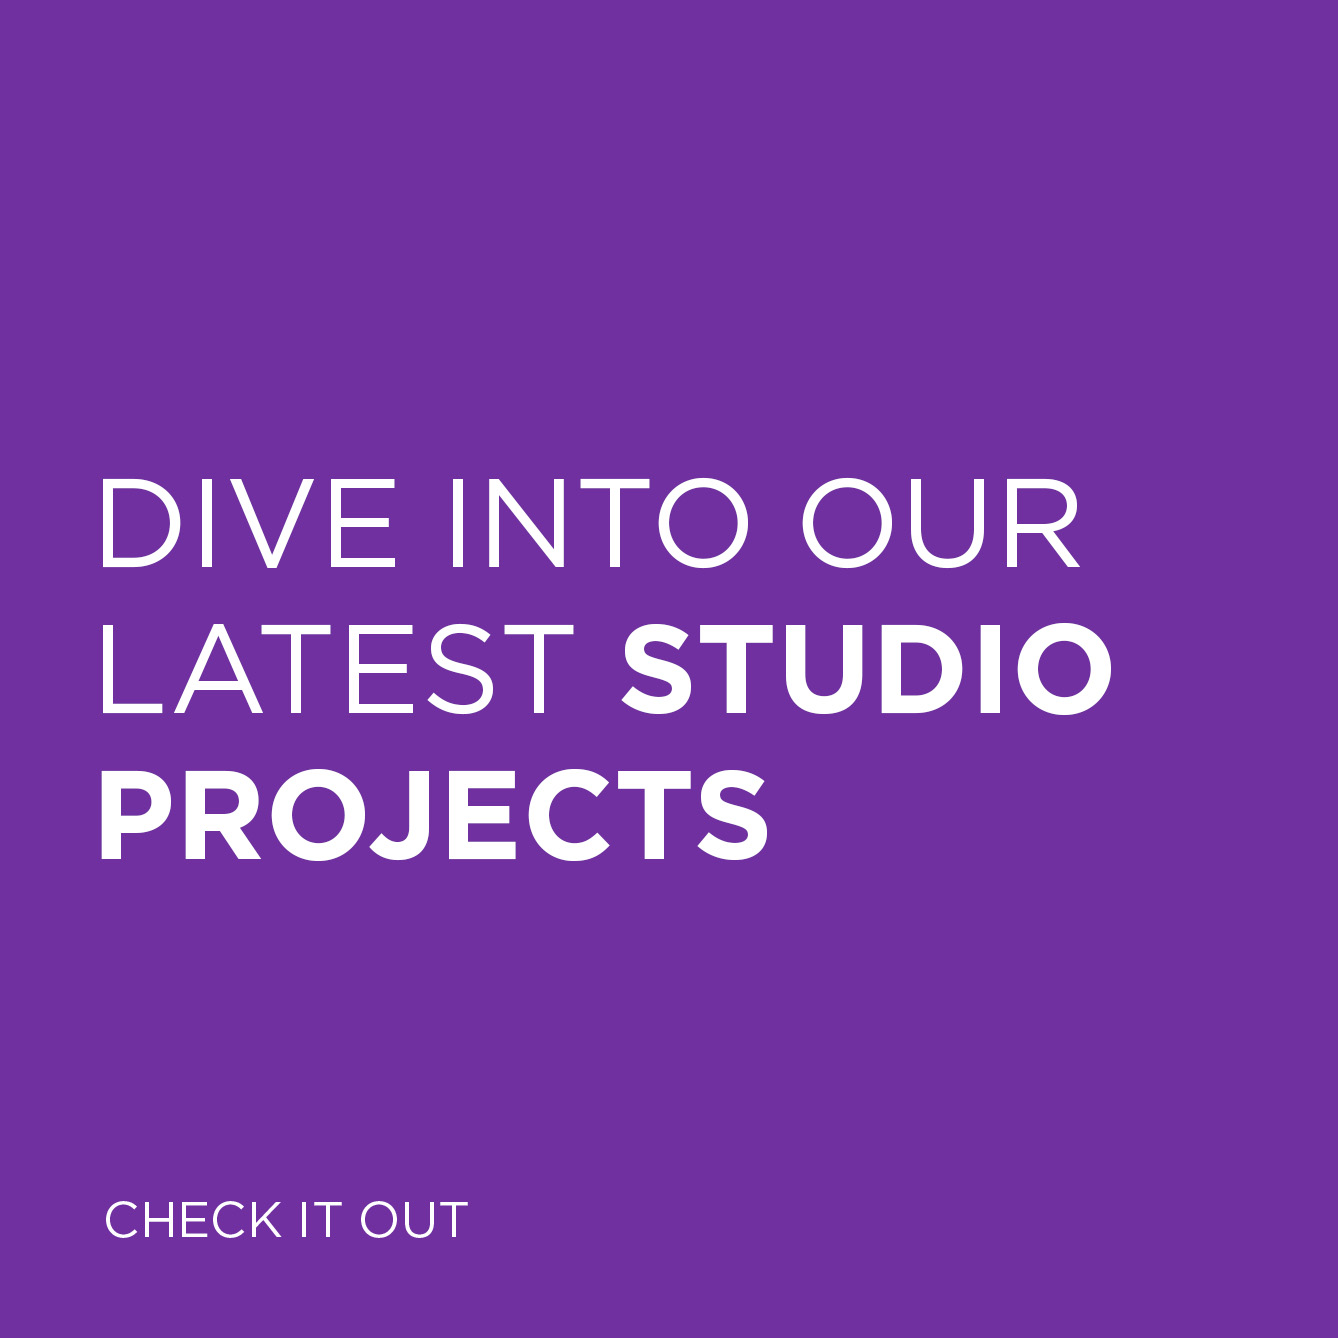 Dive into our latest studio projects – check it out